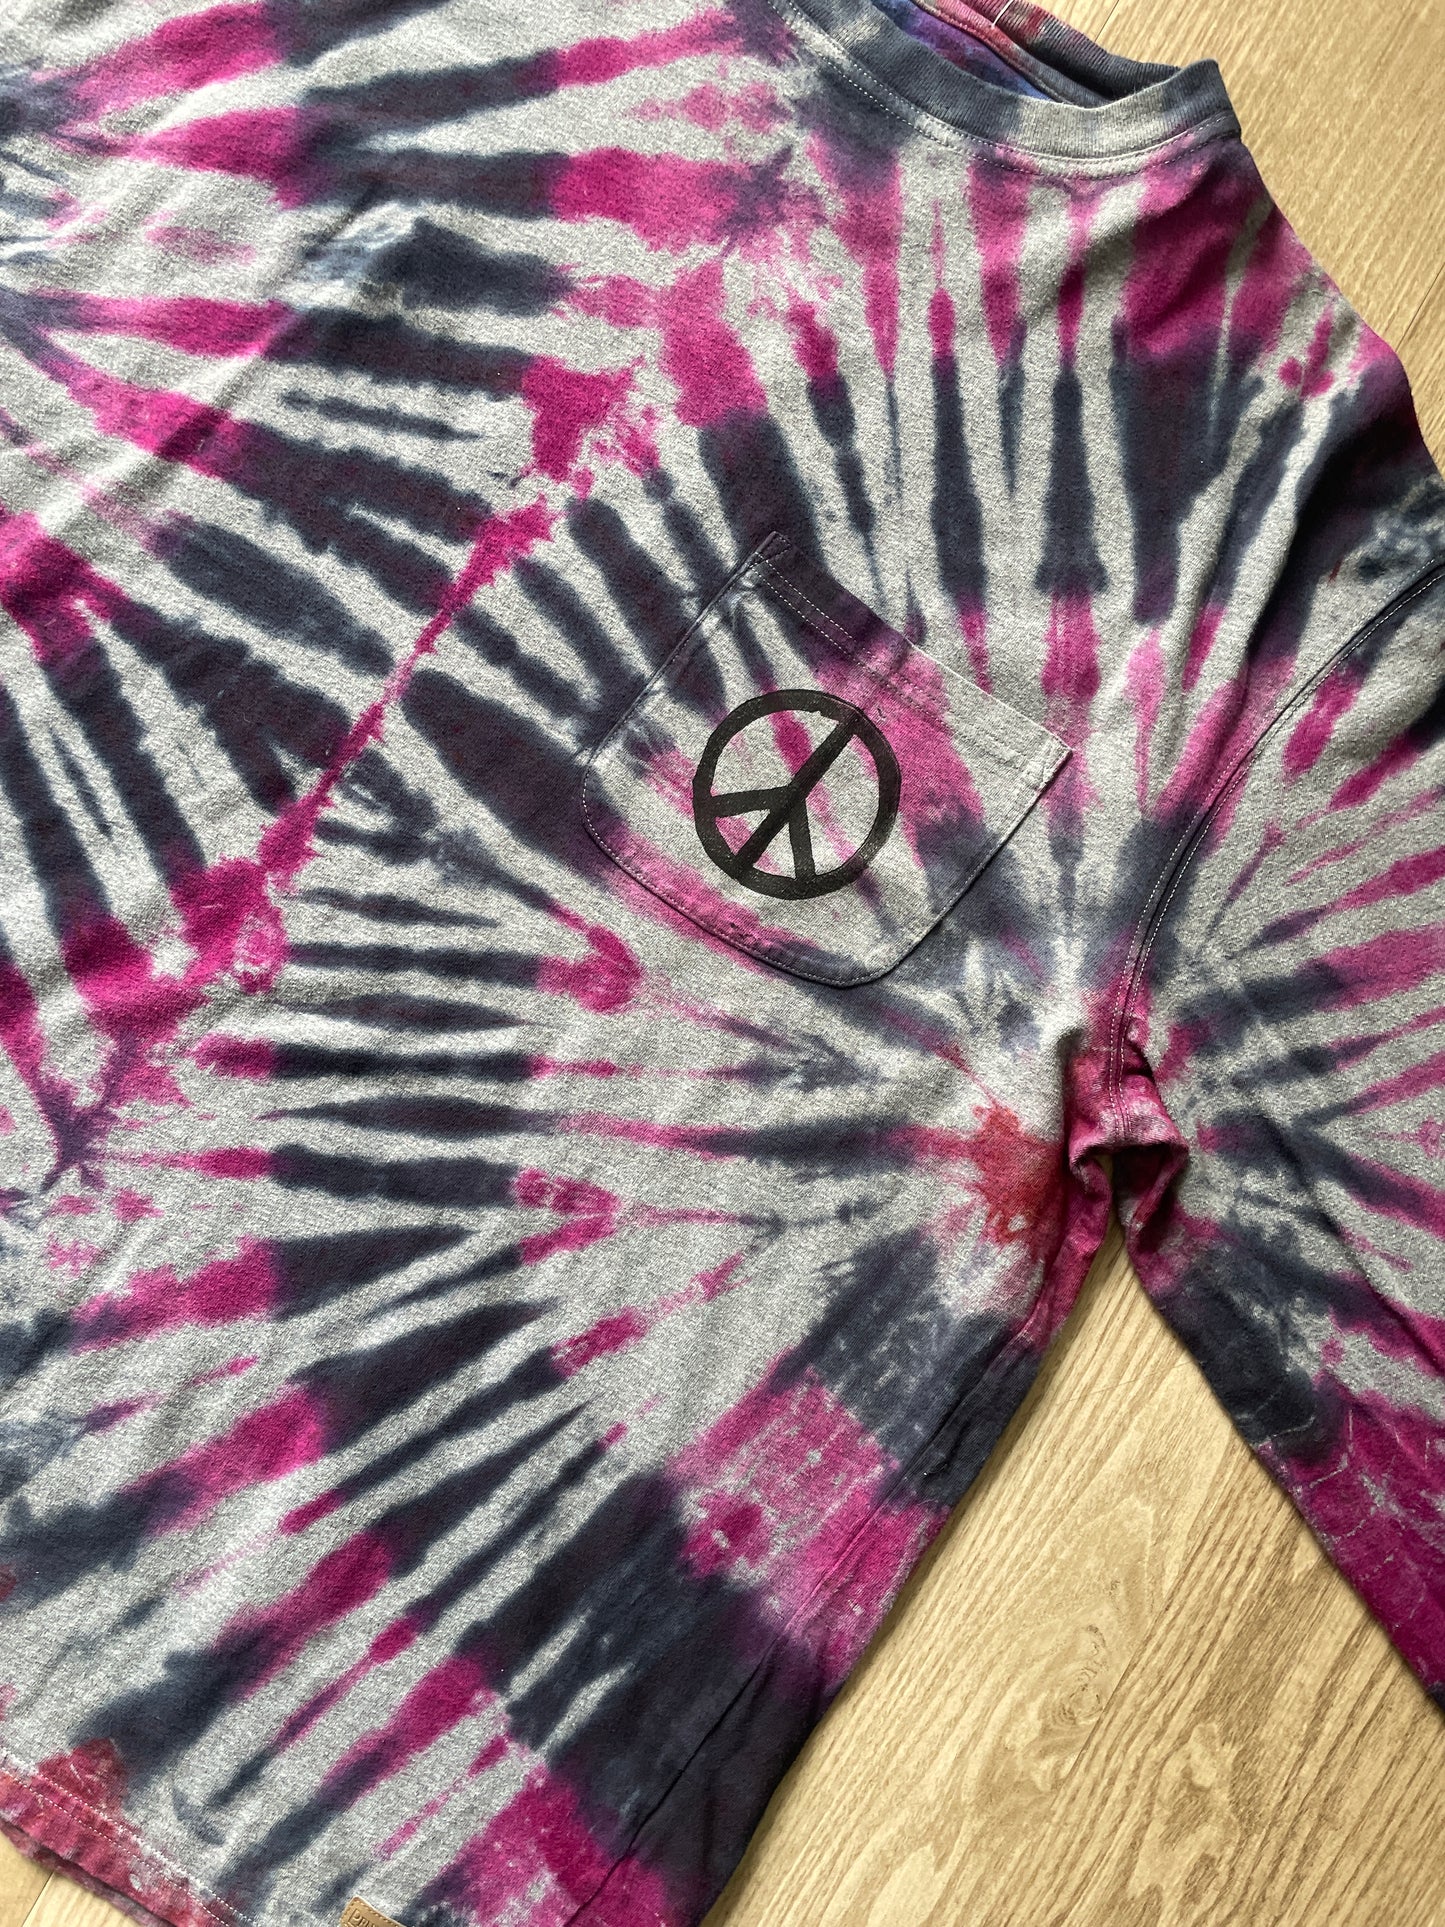 LARGE Men’s Pendleton Woolen Mills Hand-Printed Peace Sign Tie Dye Long Sleeve T-Shirt | One-Of-a-Kind Upcycled Pink and Black Graphic Tee